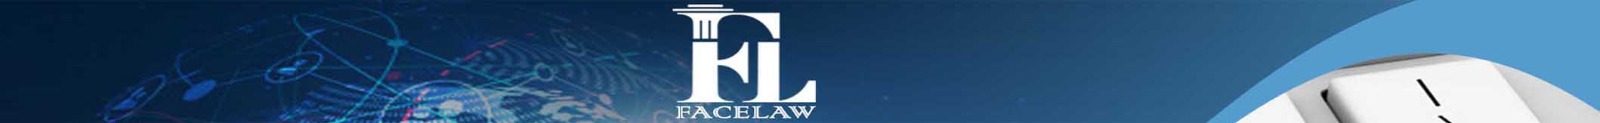 best persian wills and estates lawyer in california